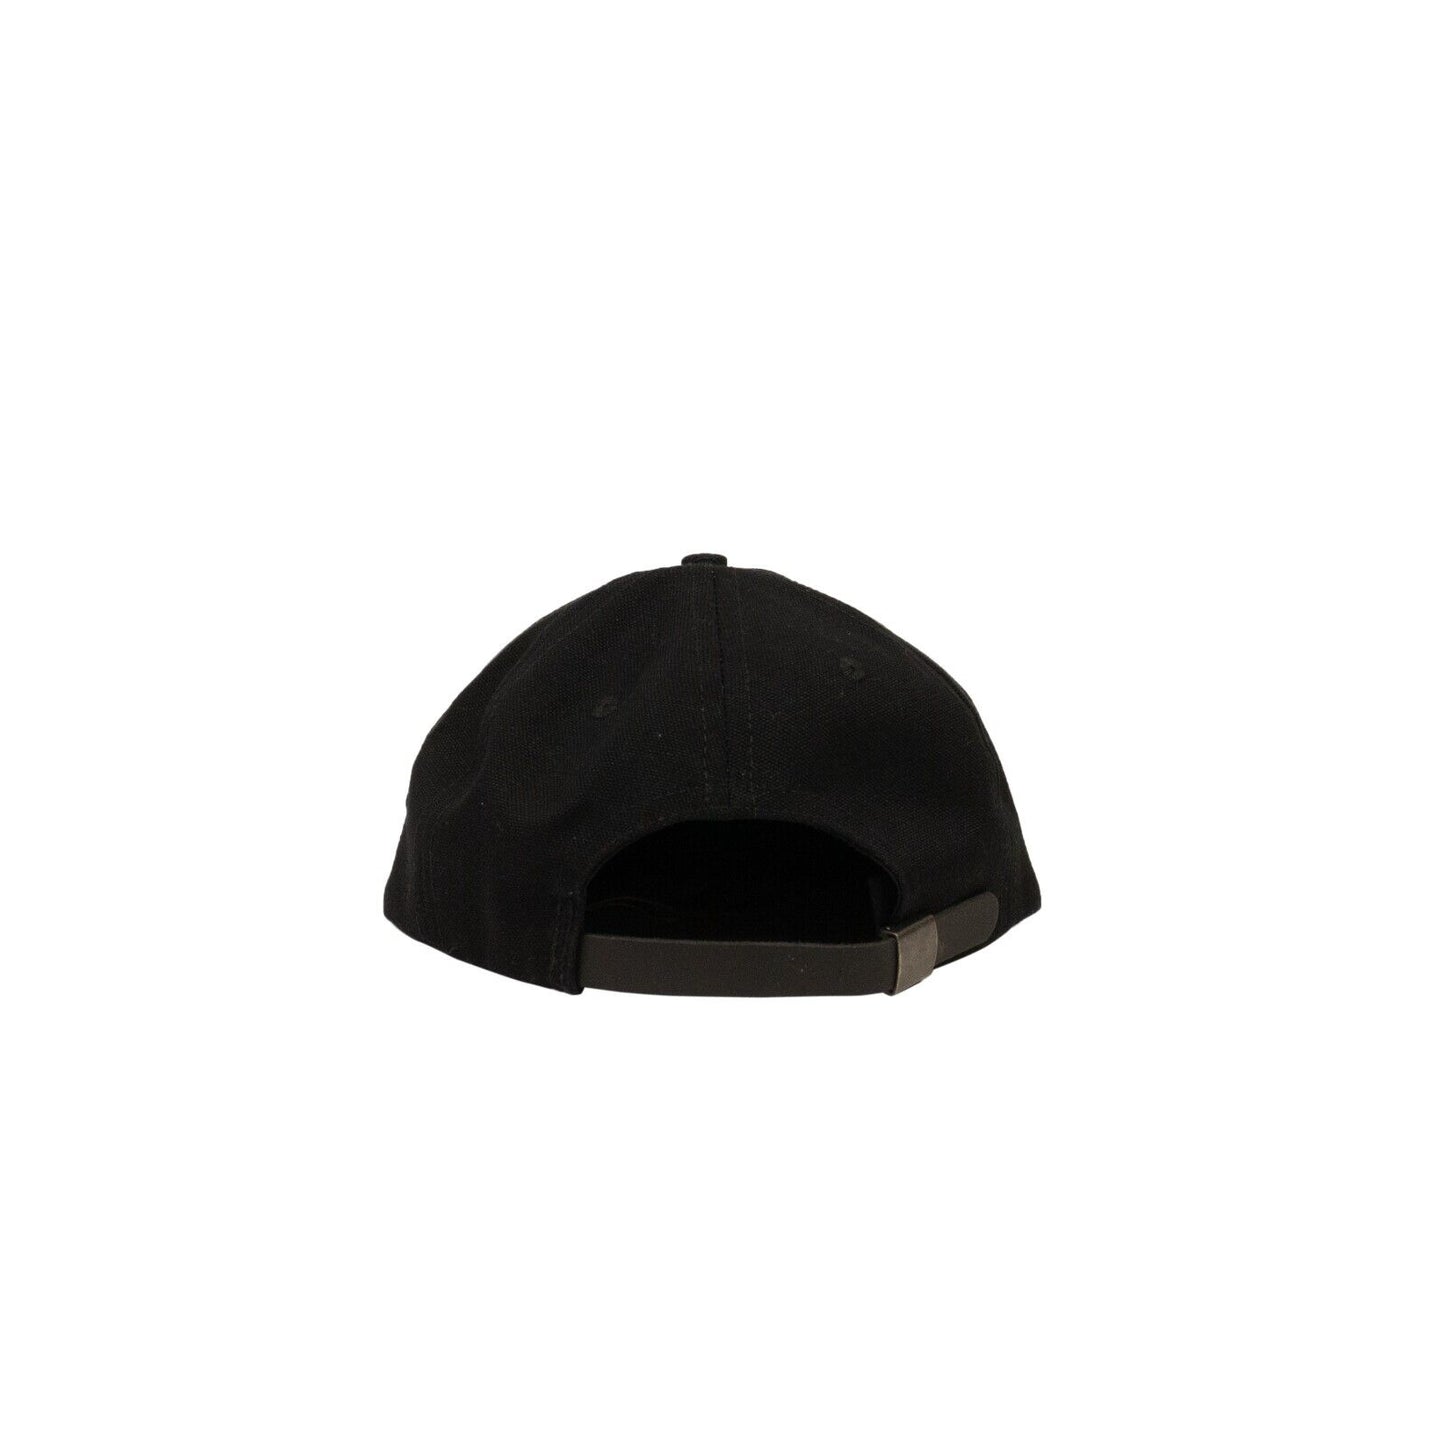 Embroidered No Plastic N Hat - Black